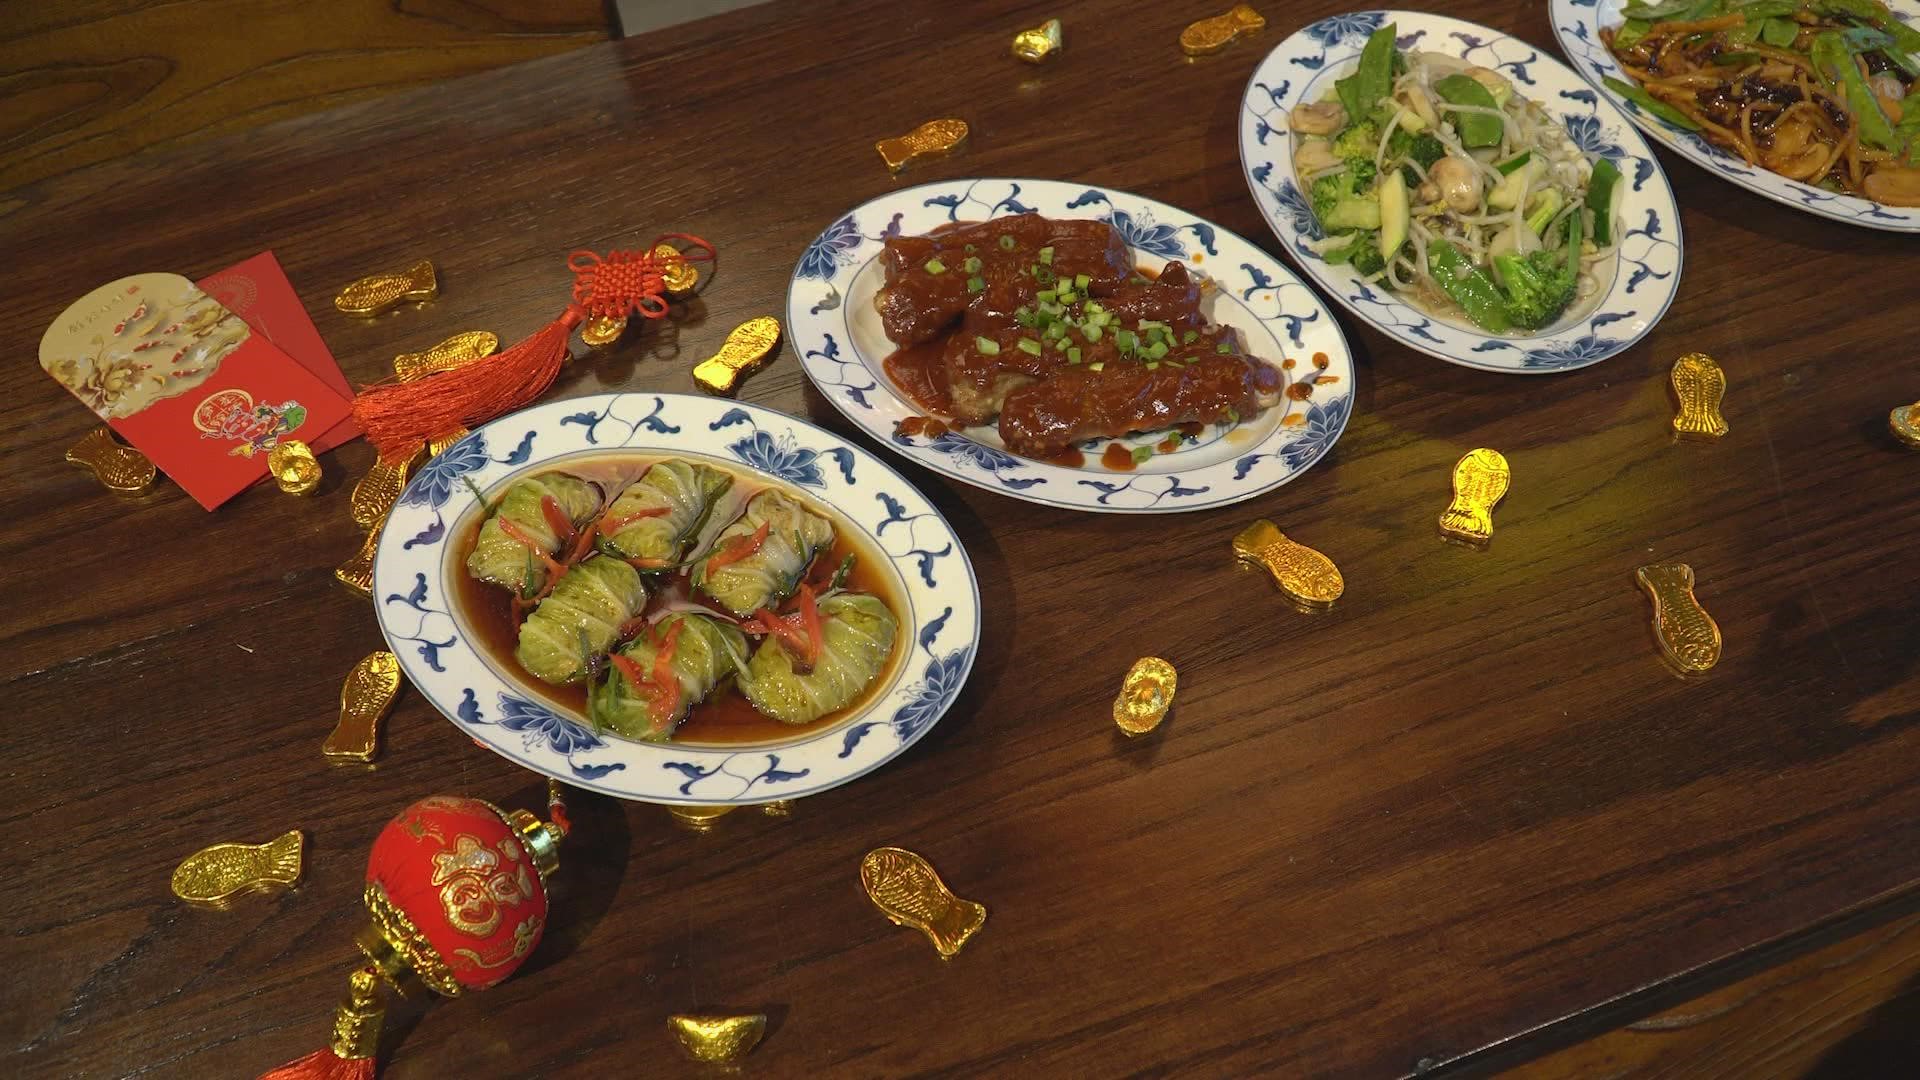 WFAA took a food tour across the DFW area, finding local restaurants and chefs who celebrate the Lunar New Year. They shared their favorite dish for the holiday.